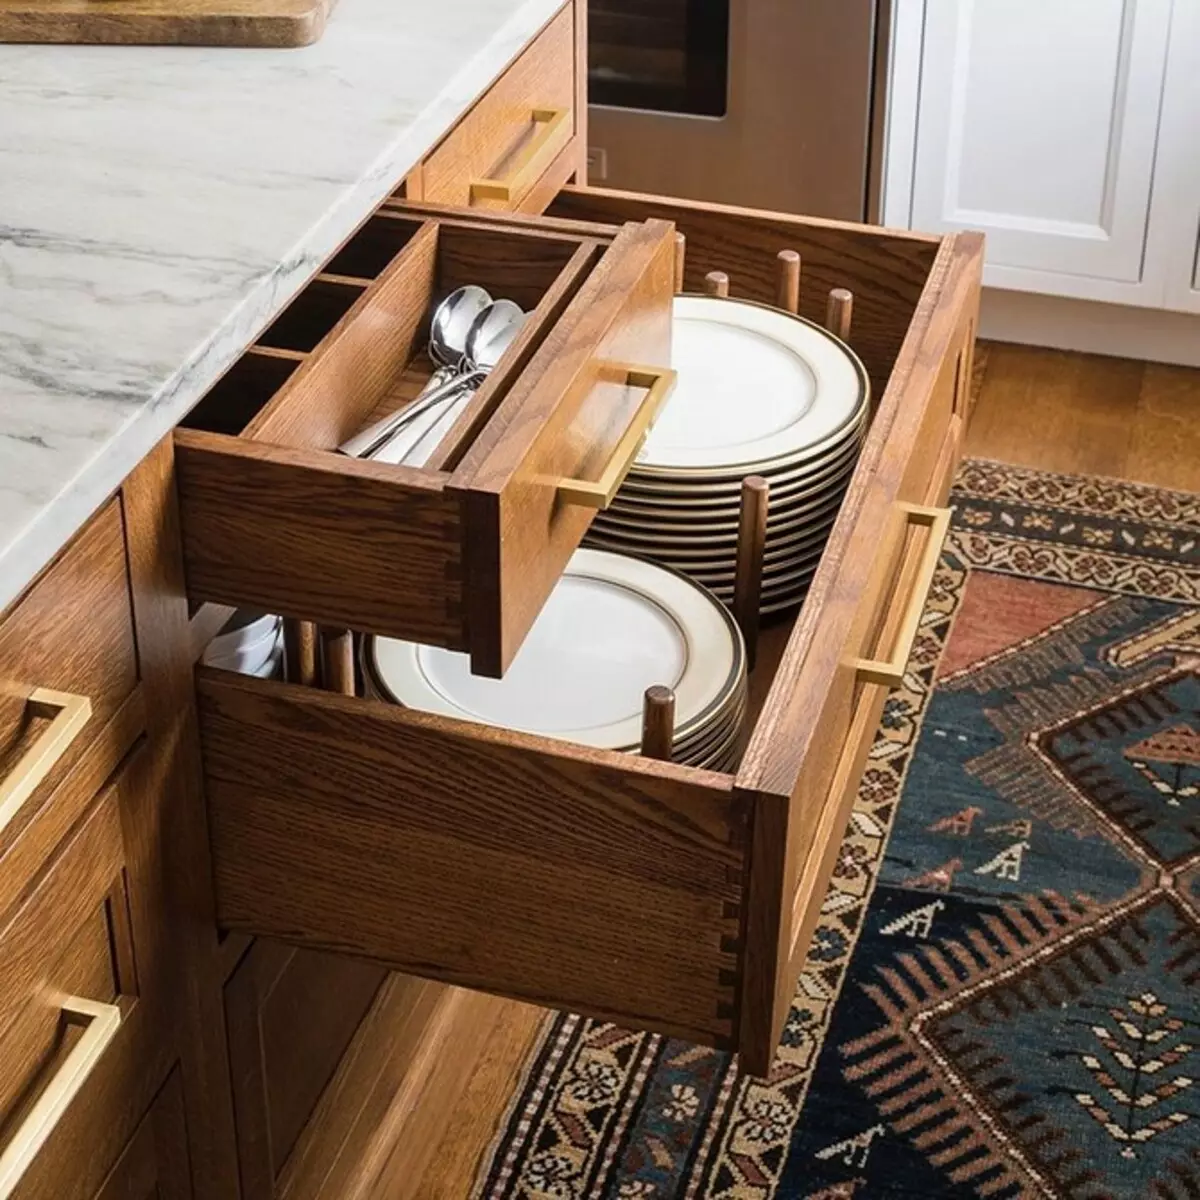 6 convenient ways to store dishes in the kitchen 1583_8